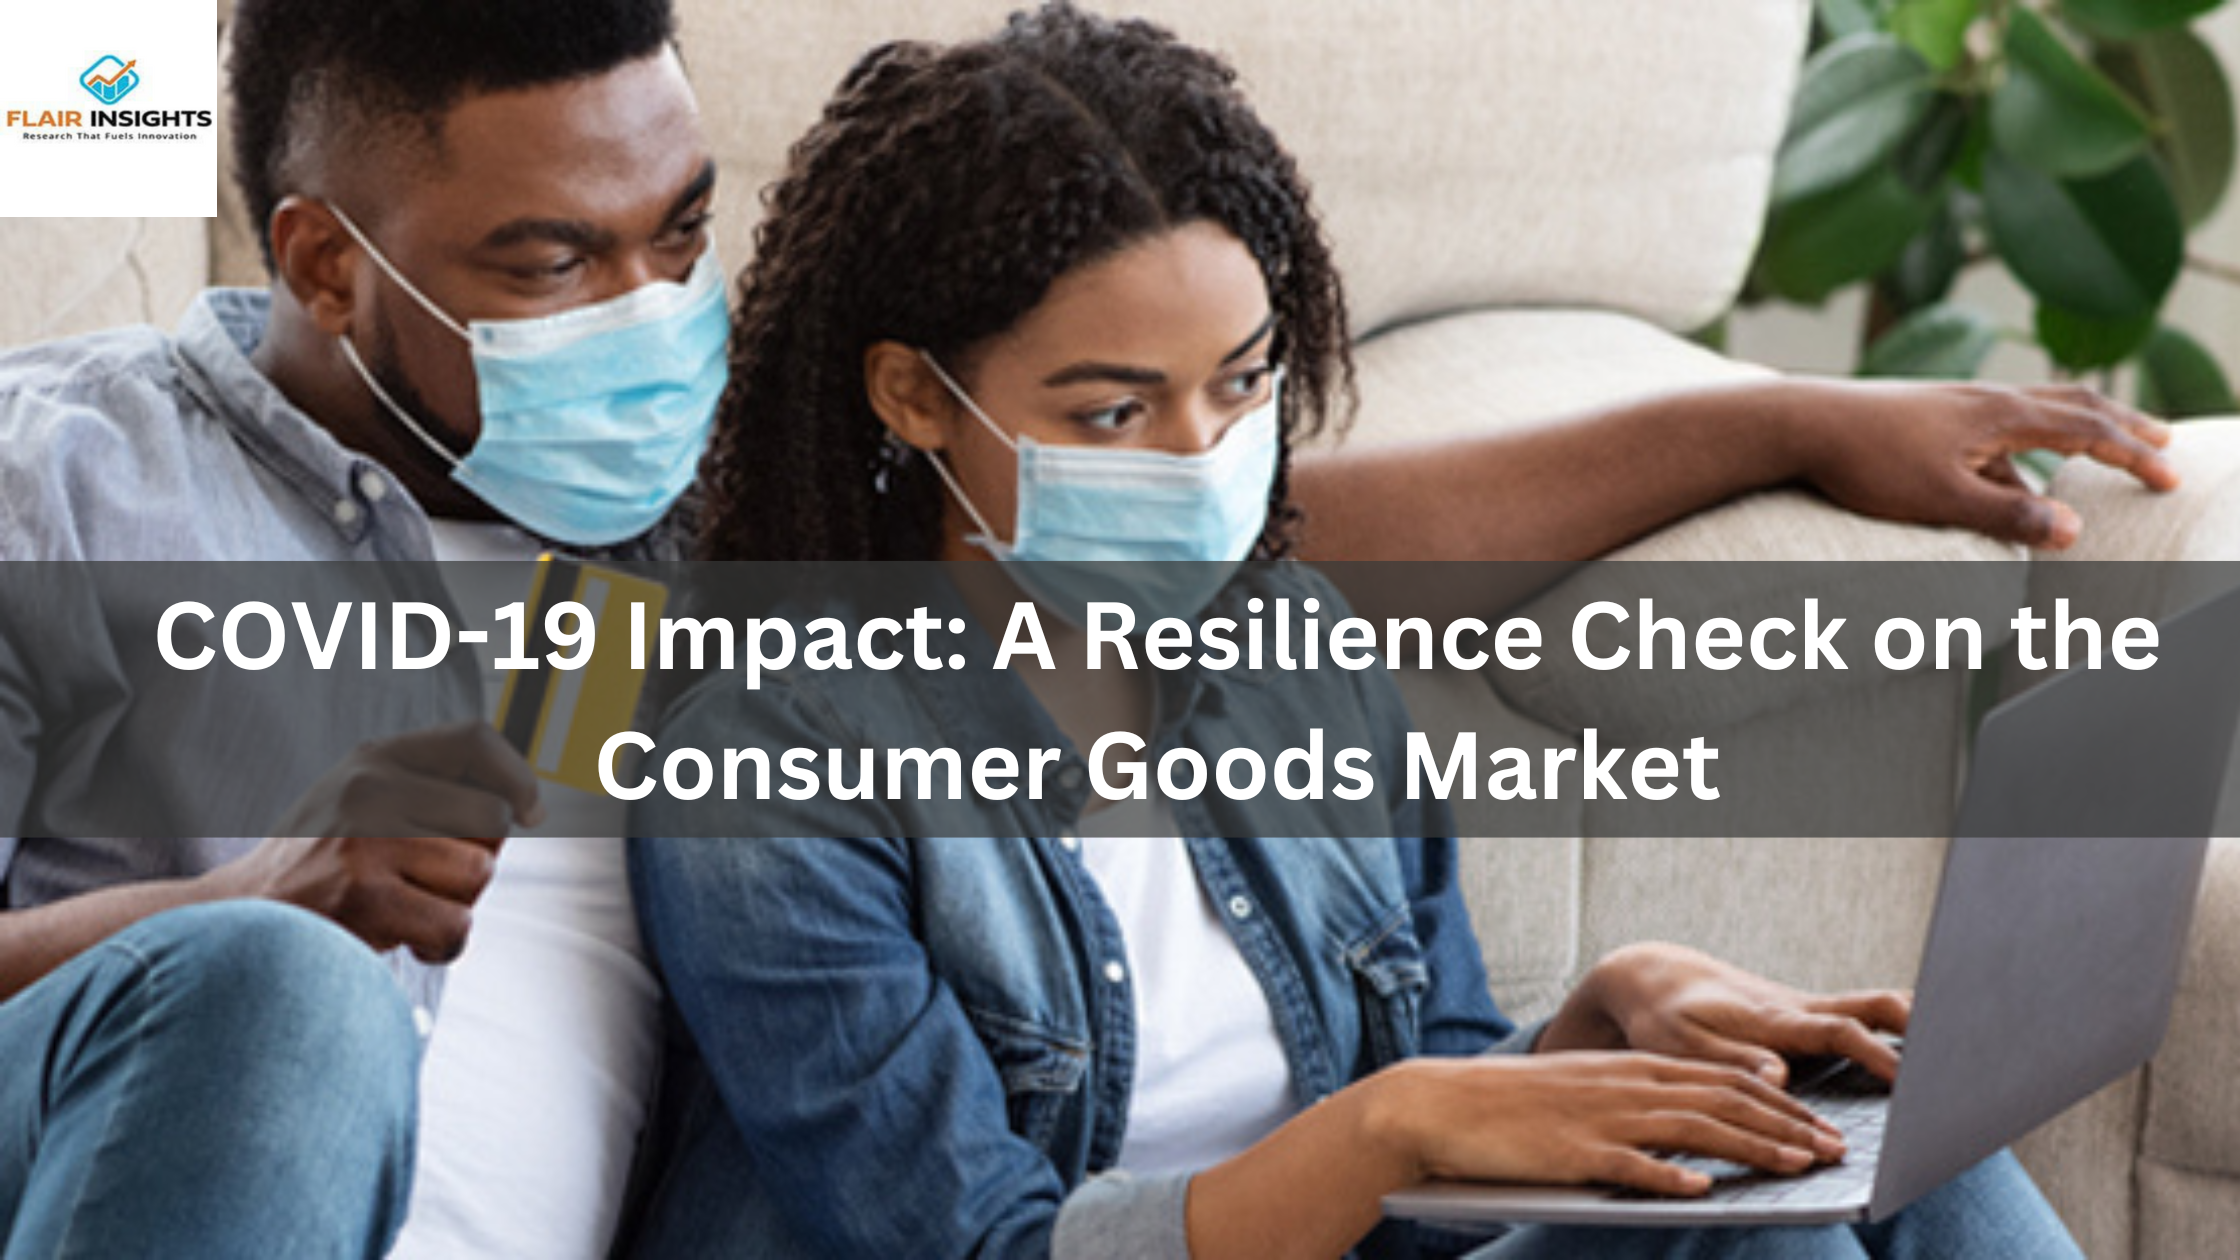 COVID-19 Impact: A Resilience Check on the Consumer Goods Market